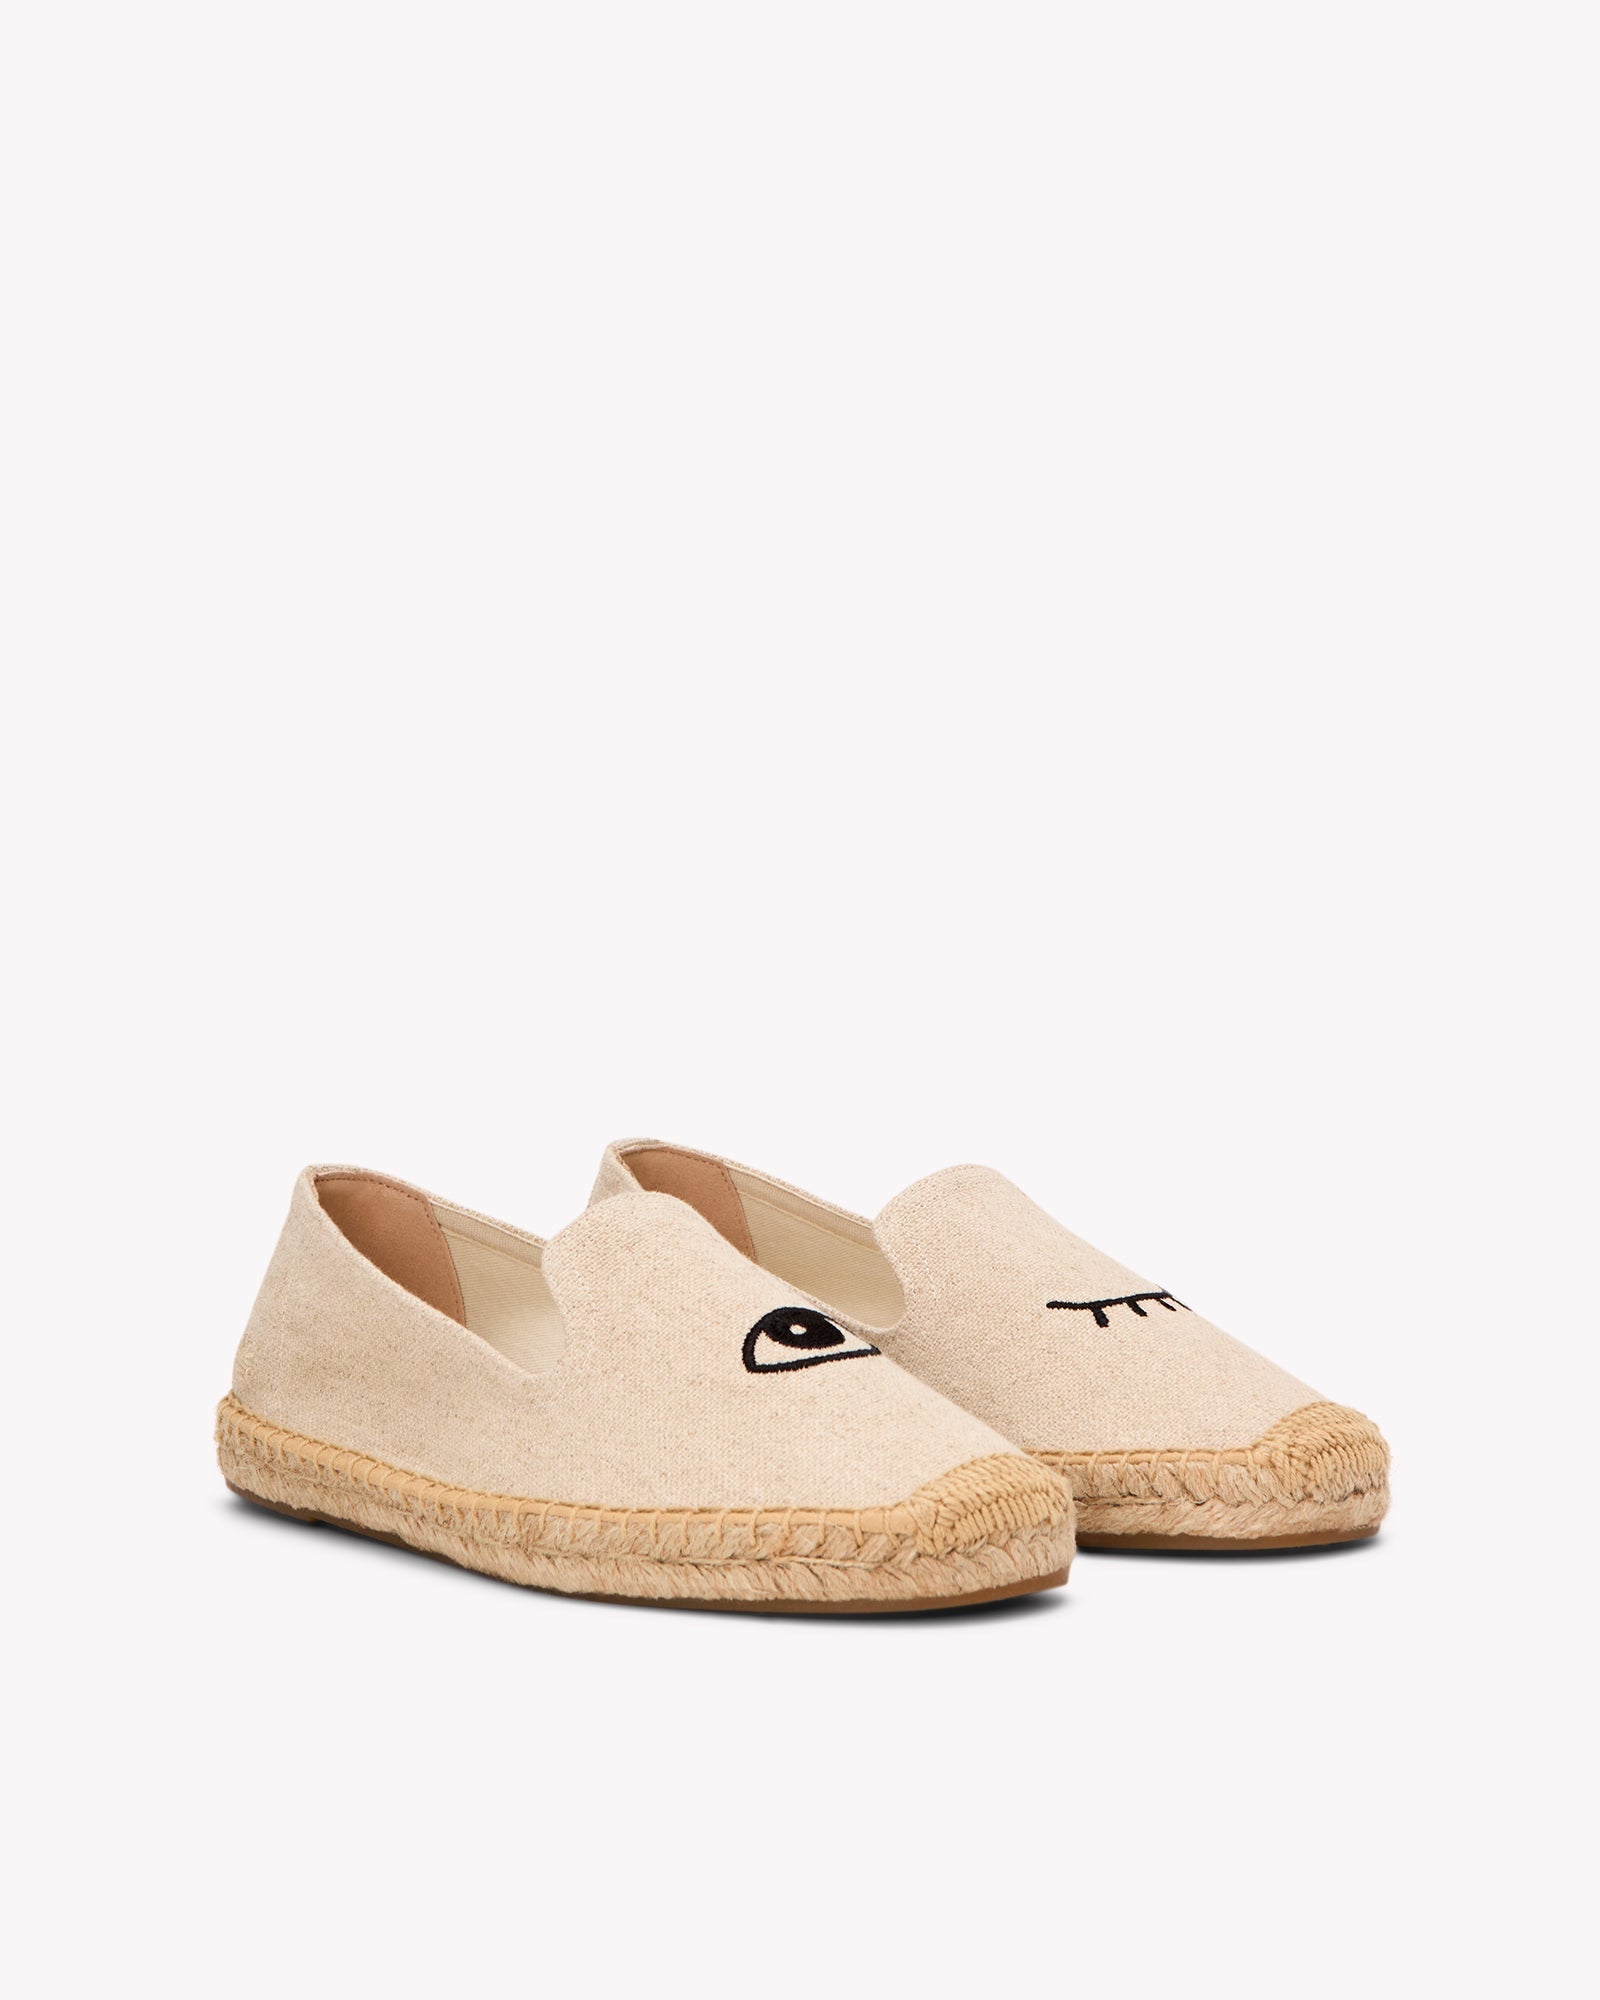 The Smoking Slipper - Embroidery / Wink - Natural Undyed - Women's - Women's Espadrilles - Natural Undyed / Wink - Soludos -